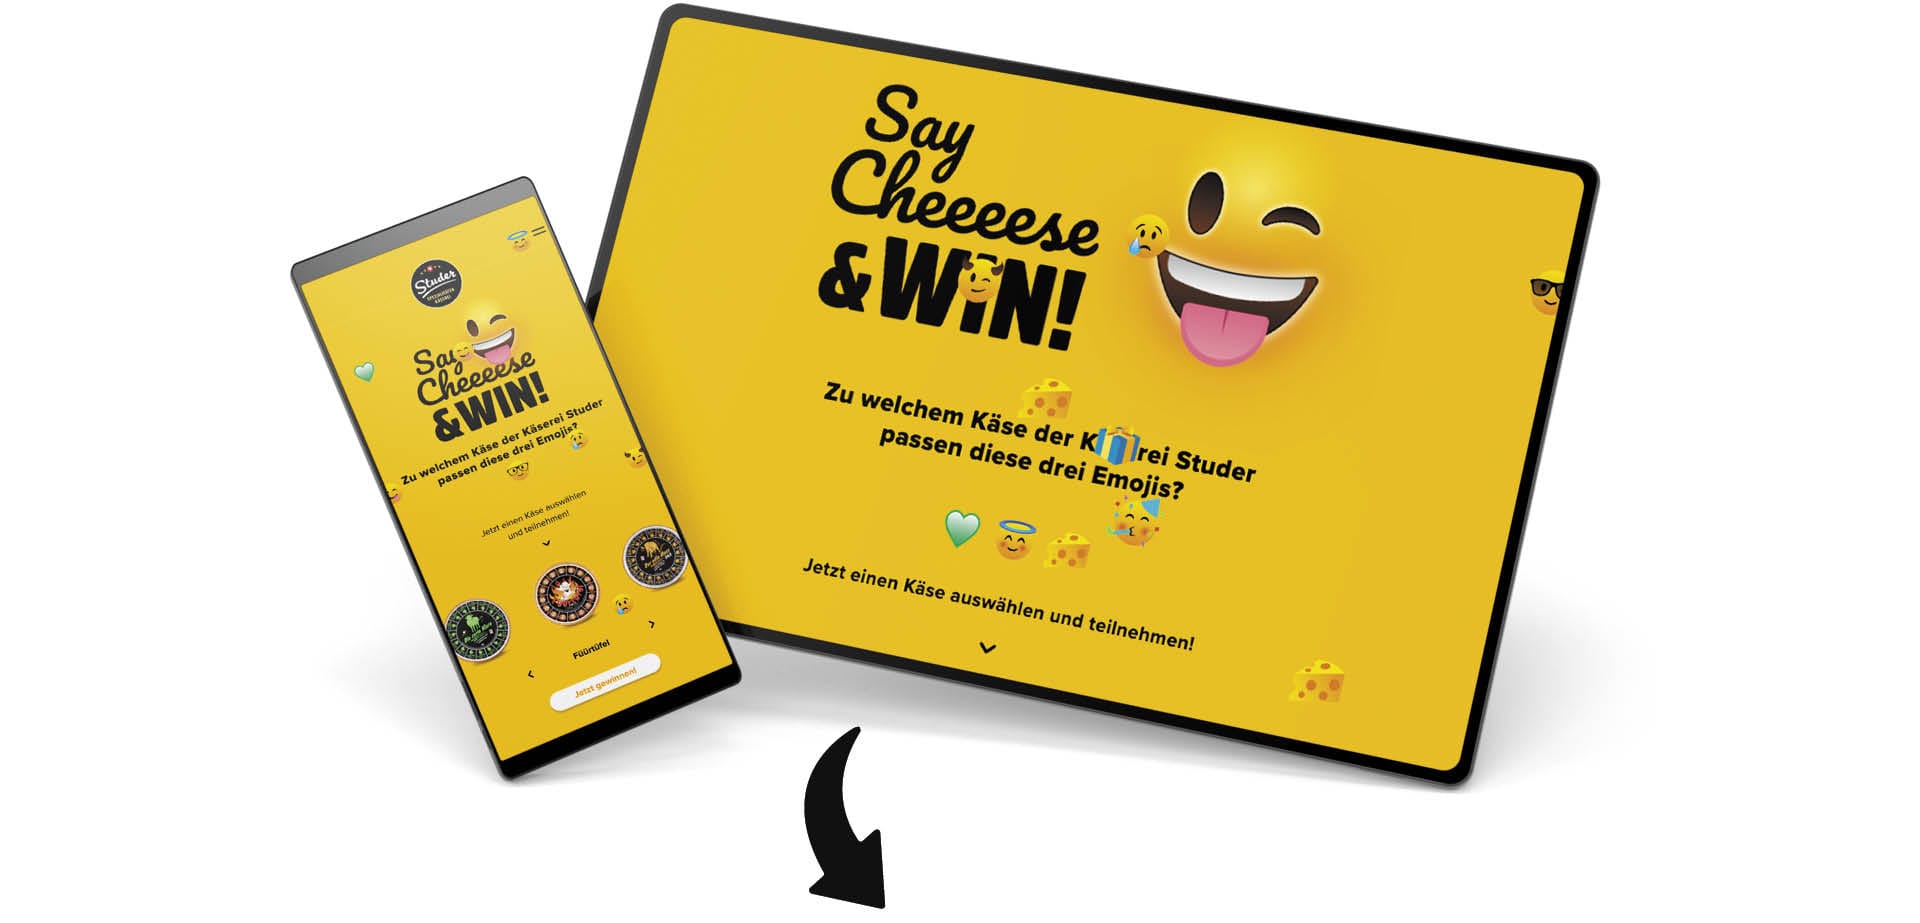 Say cheese and win Käserei Studer Promo